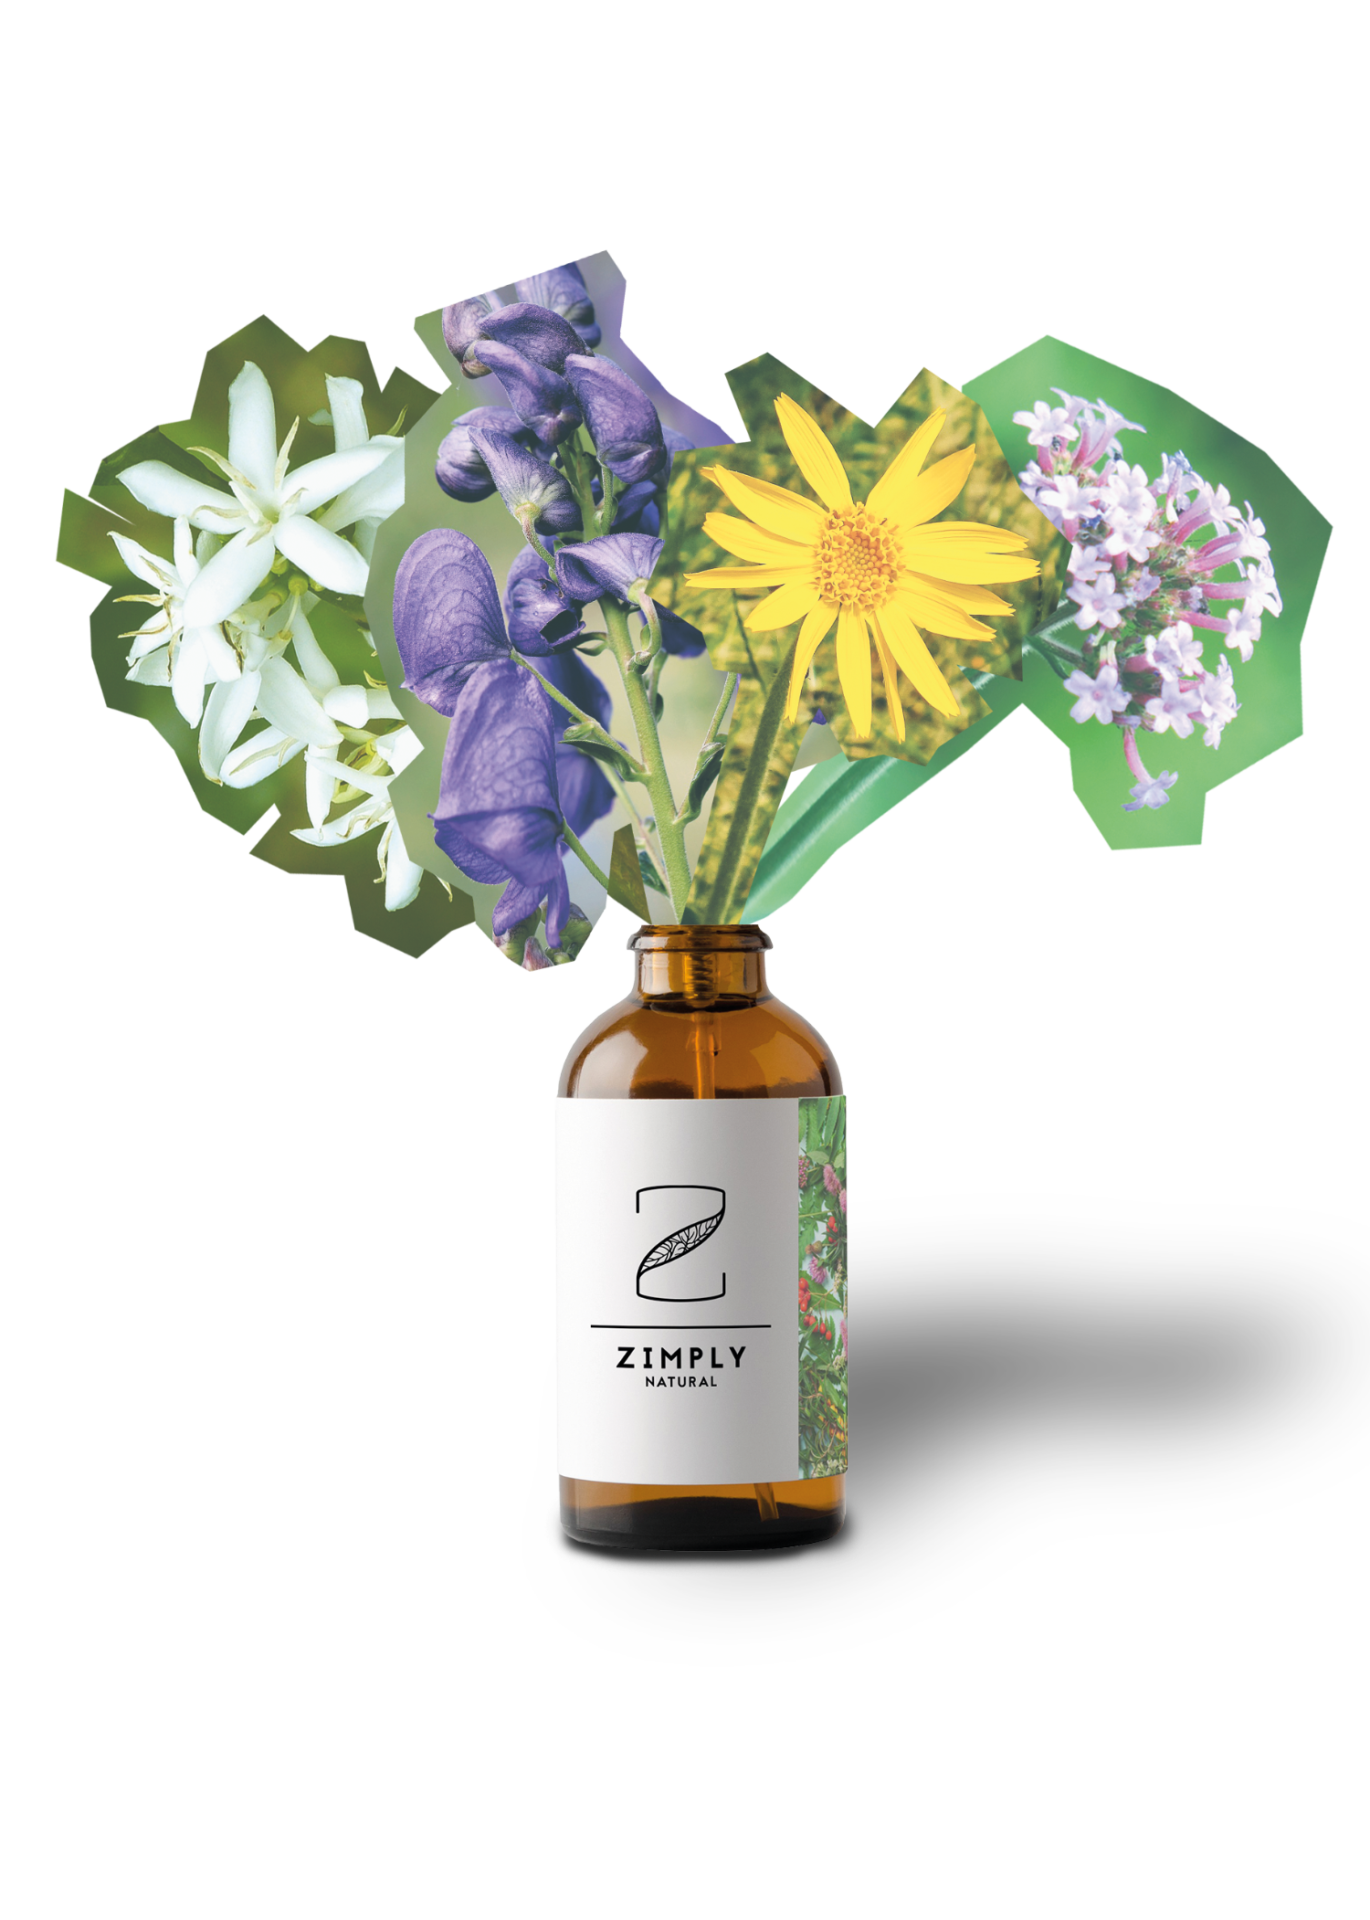 ZIMPLY NATURAL bottle with medicinal plants flower bouquet